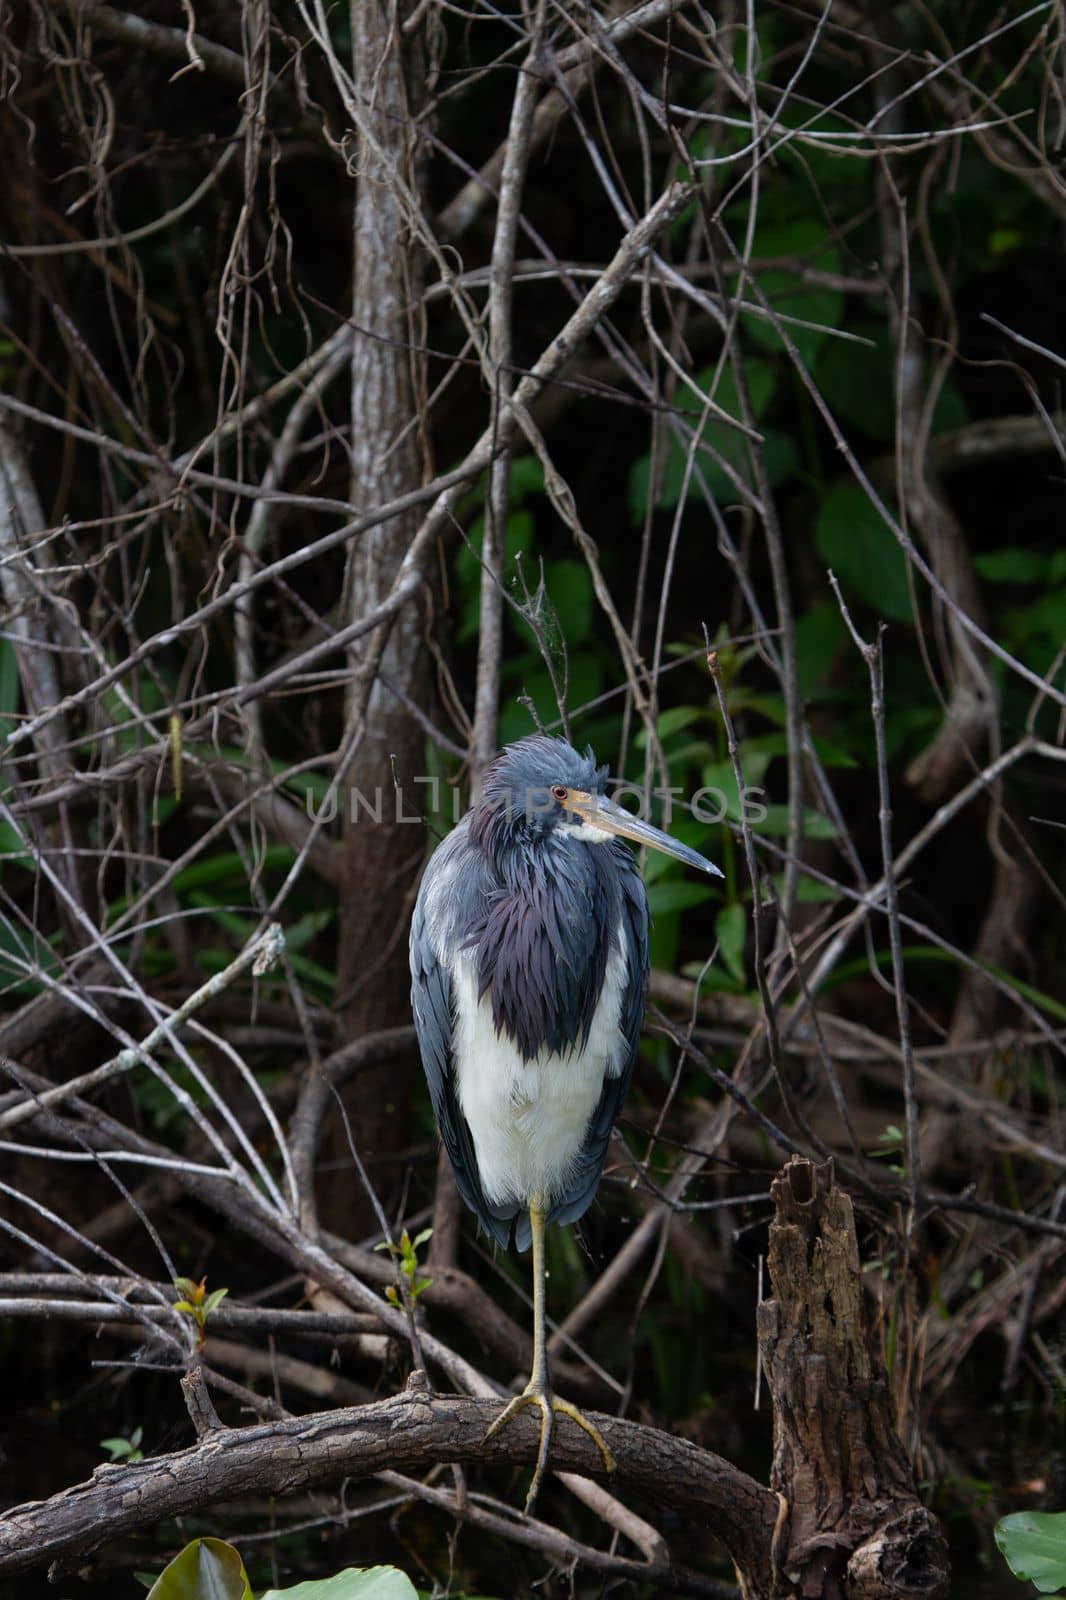 Tricolored heron perched on a branch while looking around. Found in Everglades by Granchinho